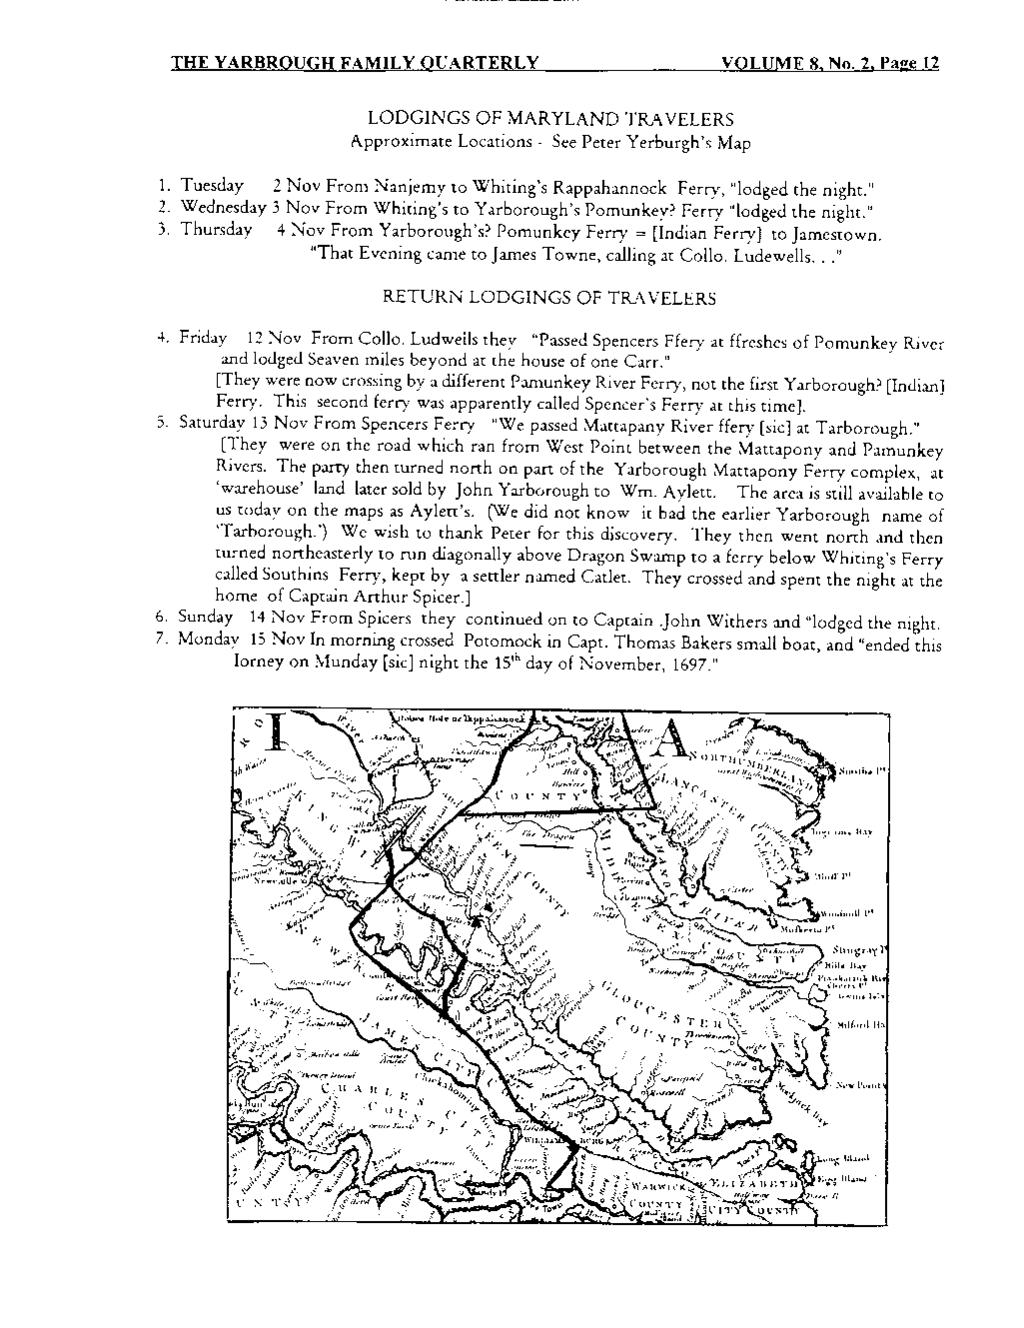 THE YARBROUGH FAMILY QUARTERLY VOLUME 8, No. 2. Page 12 LODGINGS OF MARYLAND TRAVELERS Approximate Locations- See Peter Yerburgh's Map 1.